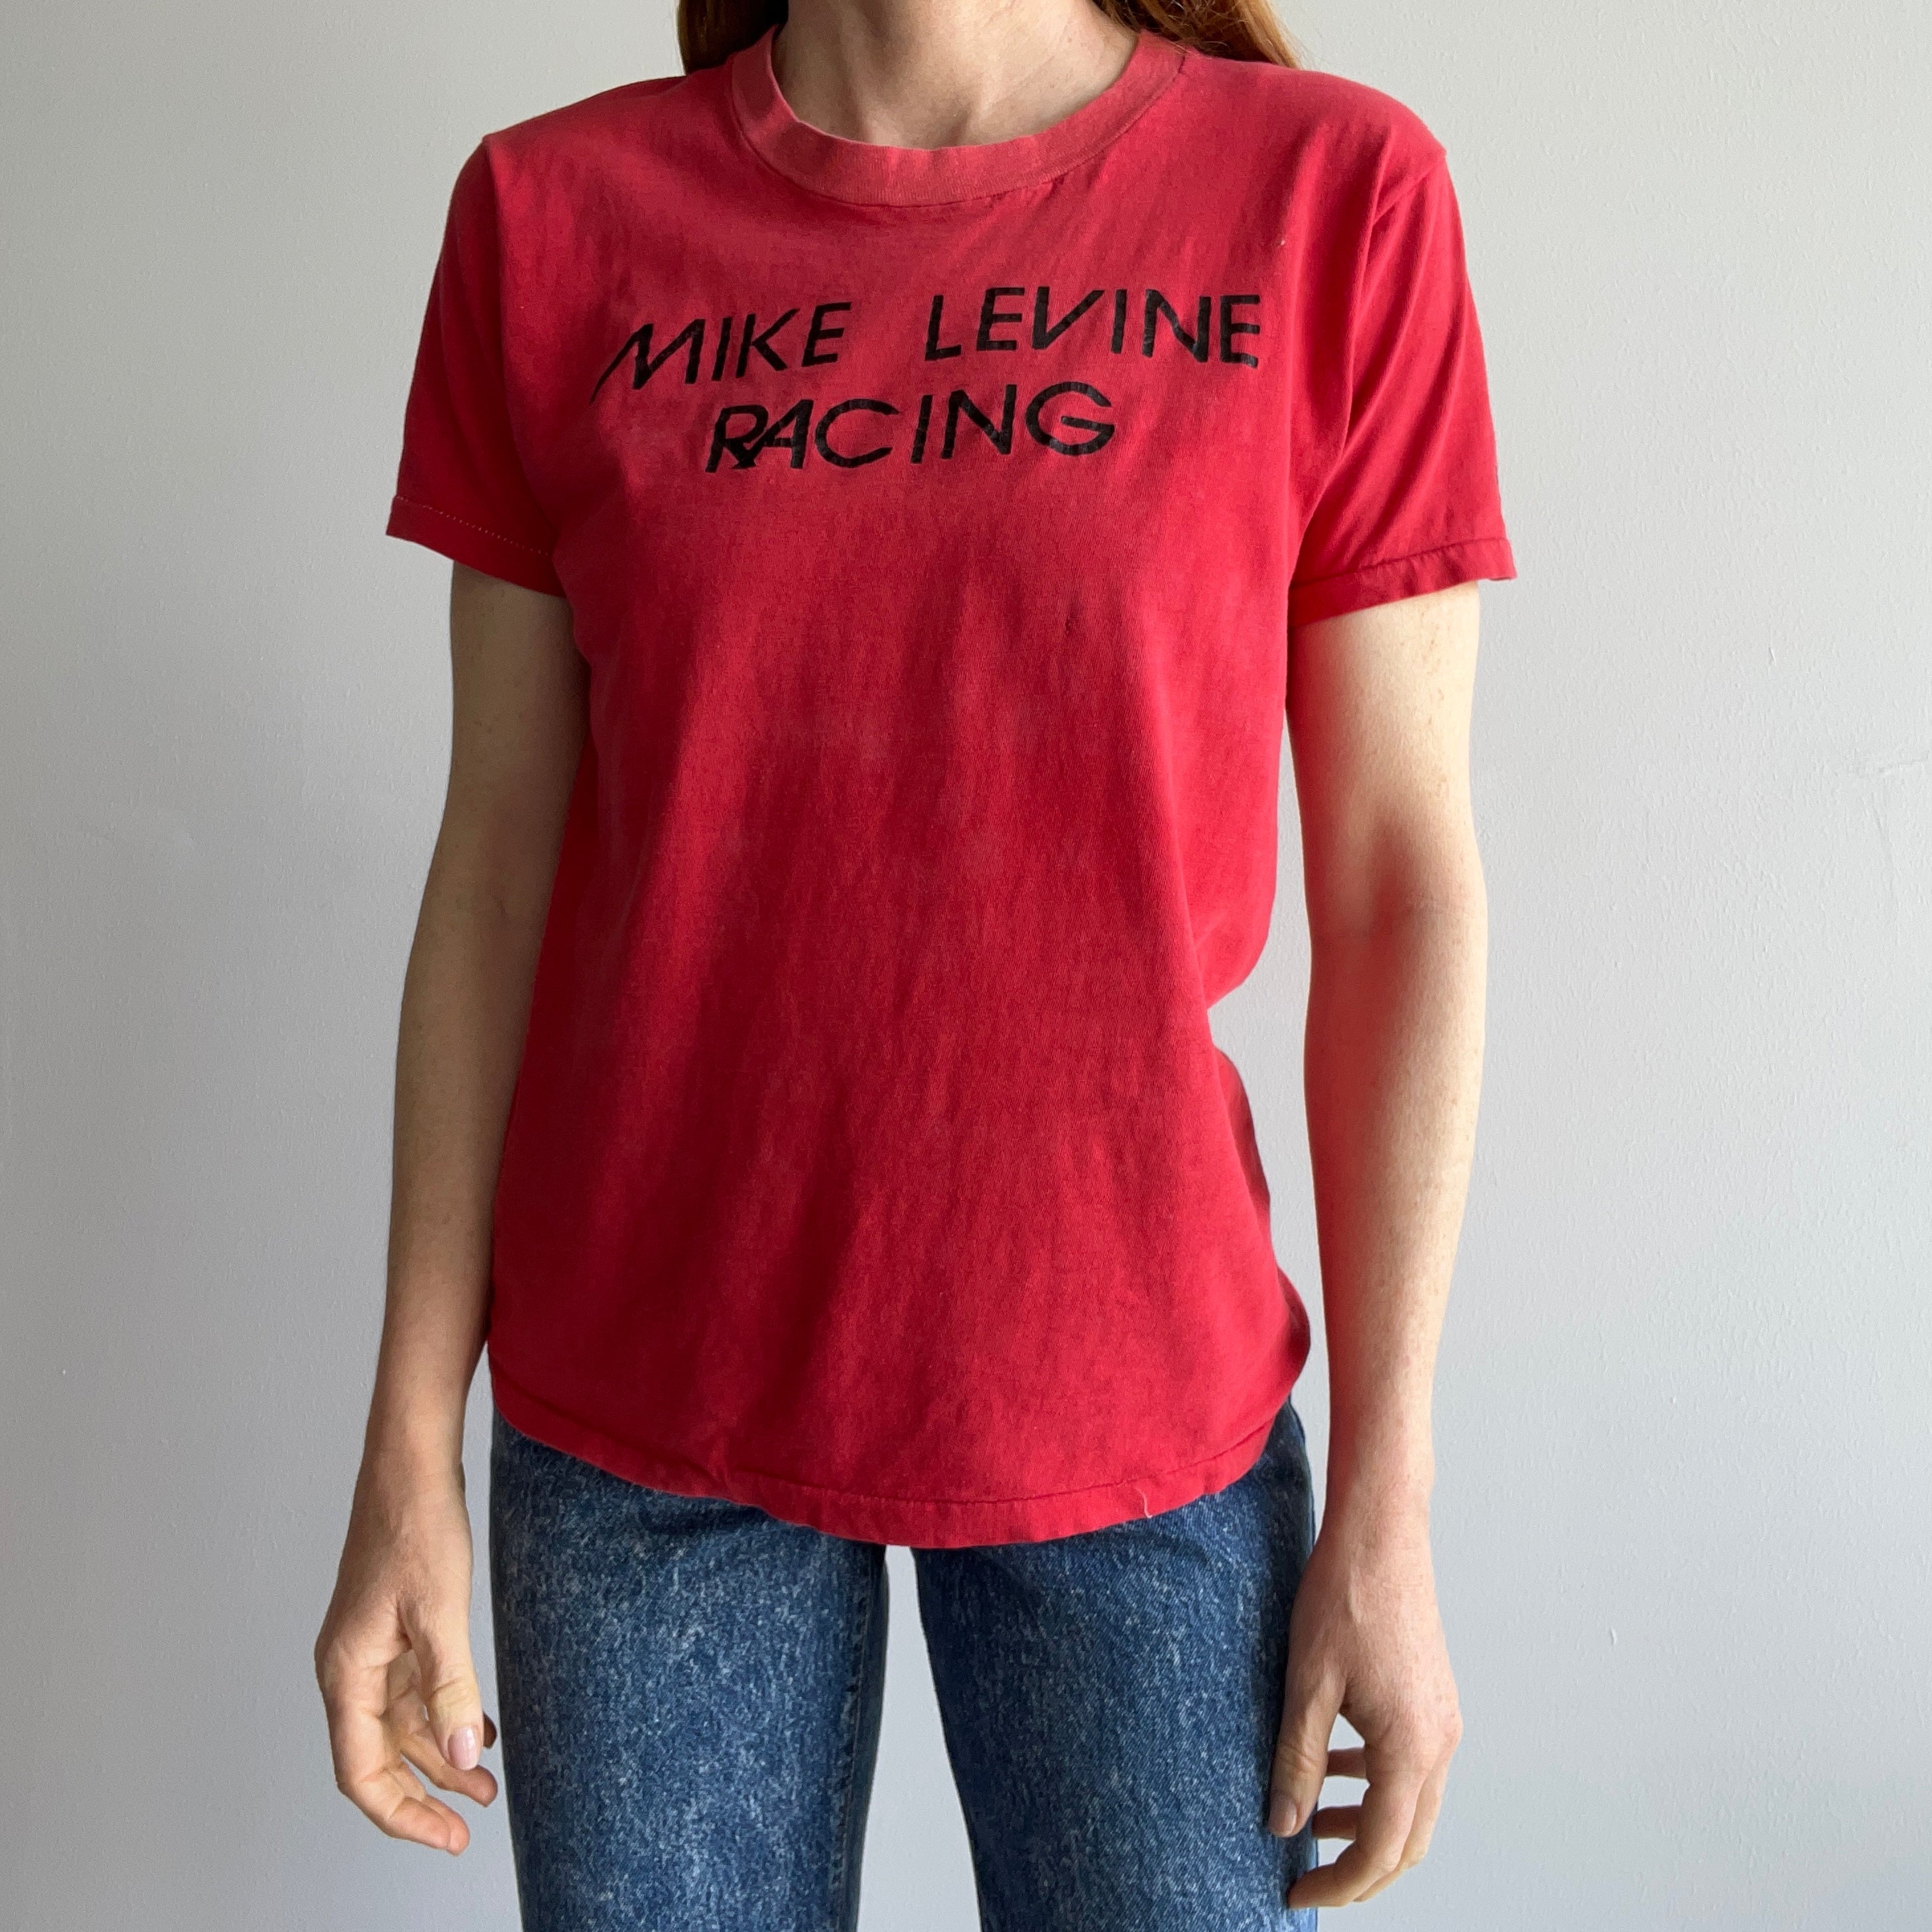 1970s Mike Levine Racing Extra Super Rad T-Shirt - OMFG